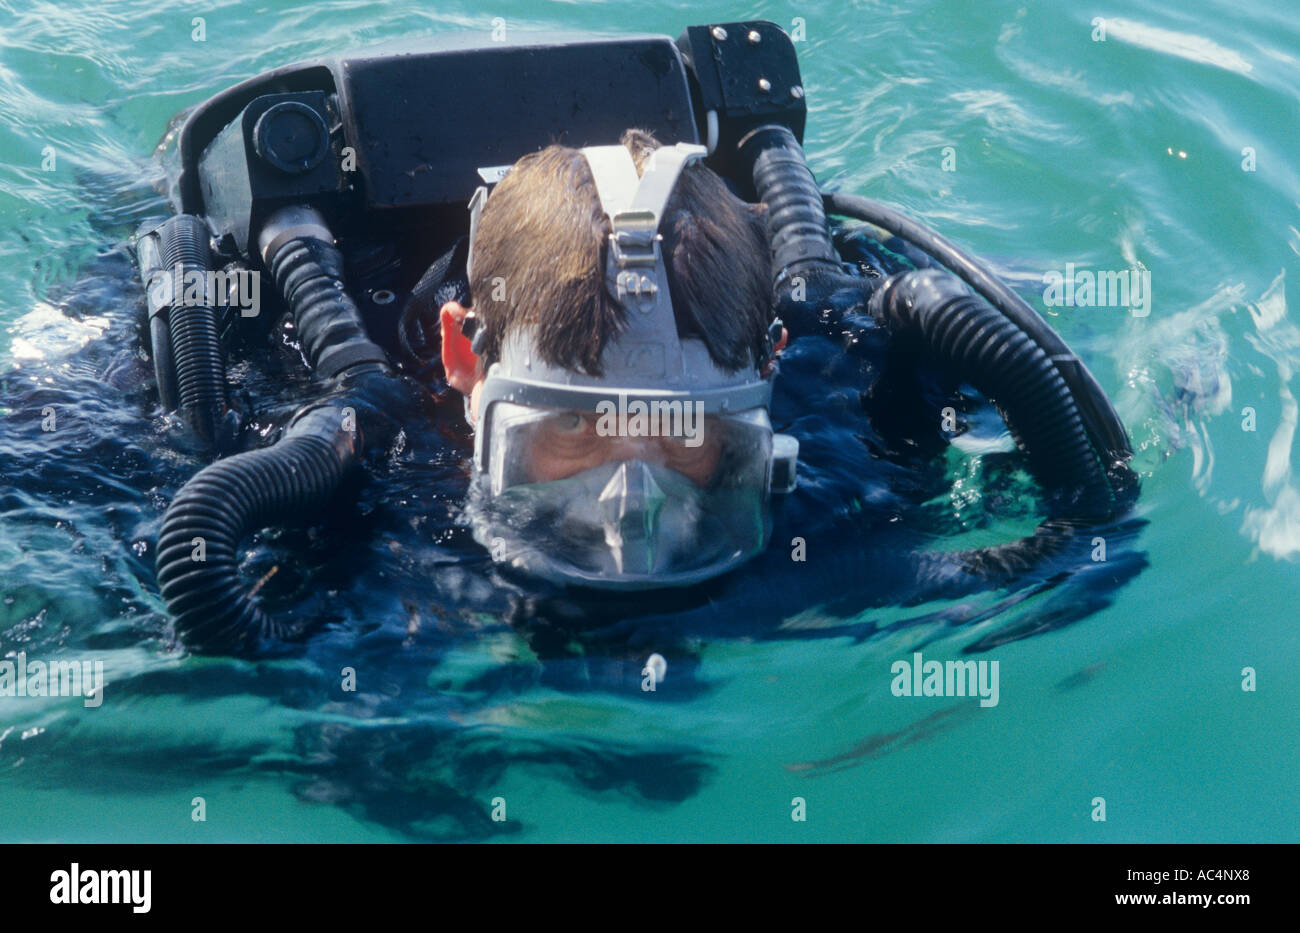 Military EOD diver wearing full face mask with built in communications and using a rebreather Stock Photo